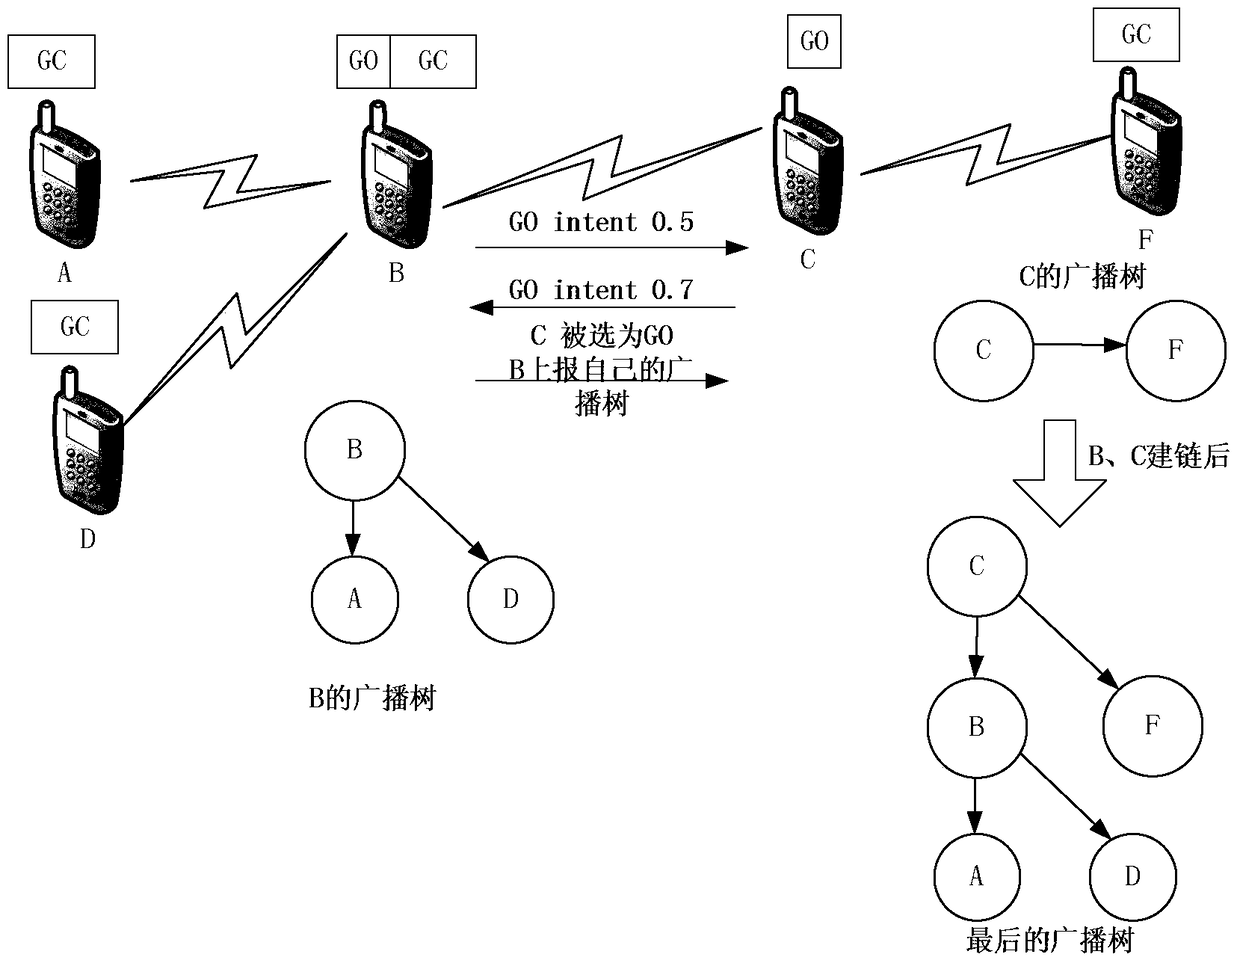 A long life cycle broadcast tree establishment method based on android WI-FI DIRECT mode